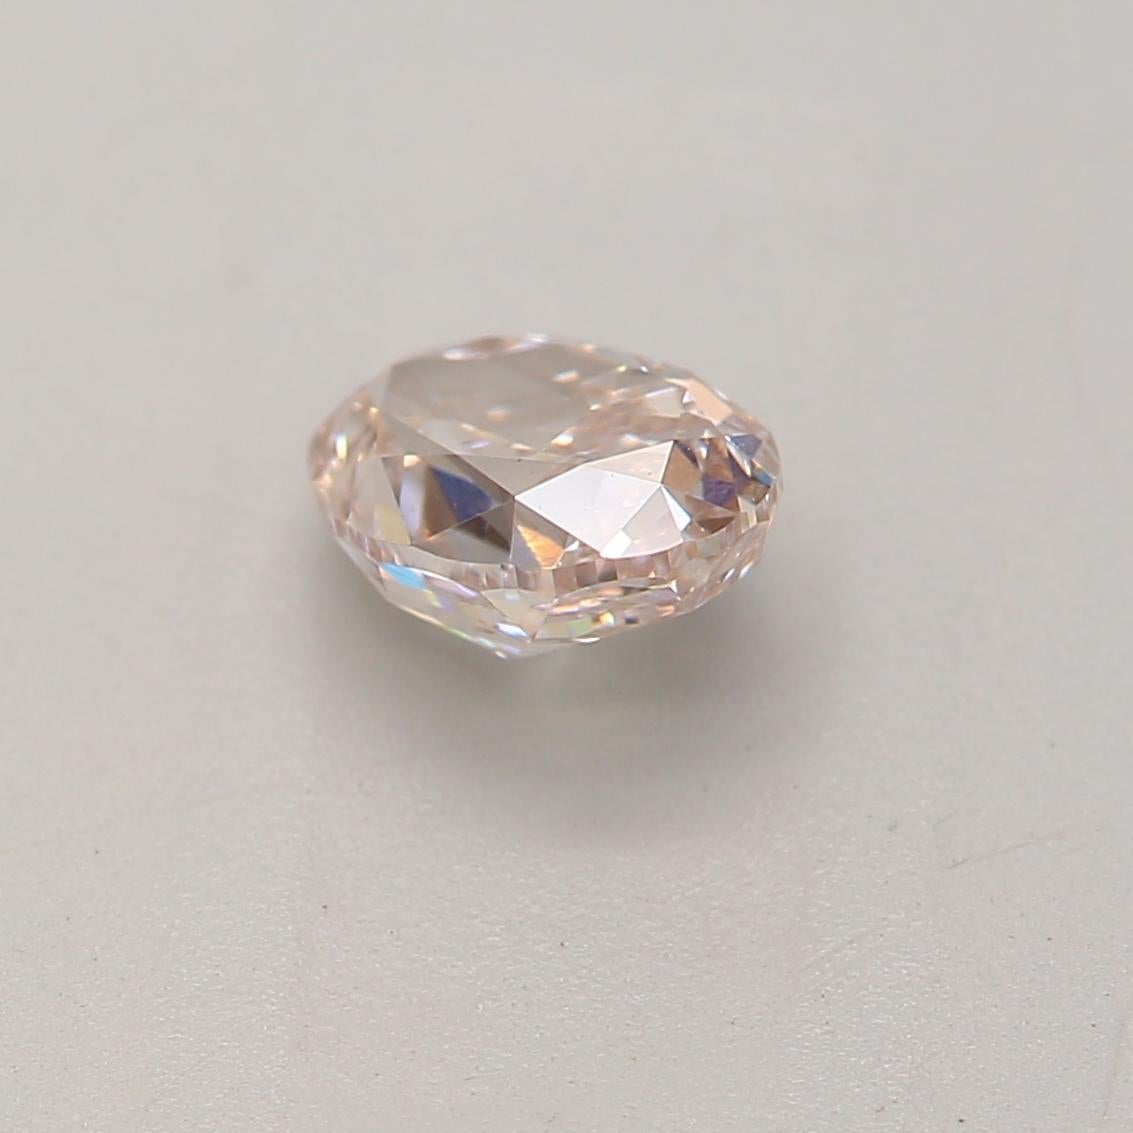 Oval Cut 0.50 Carat Light Pinkish Brown Oval cut diamond VS2 Clarity GIA Certified For Sale